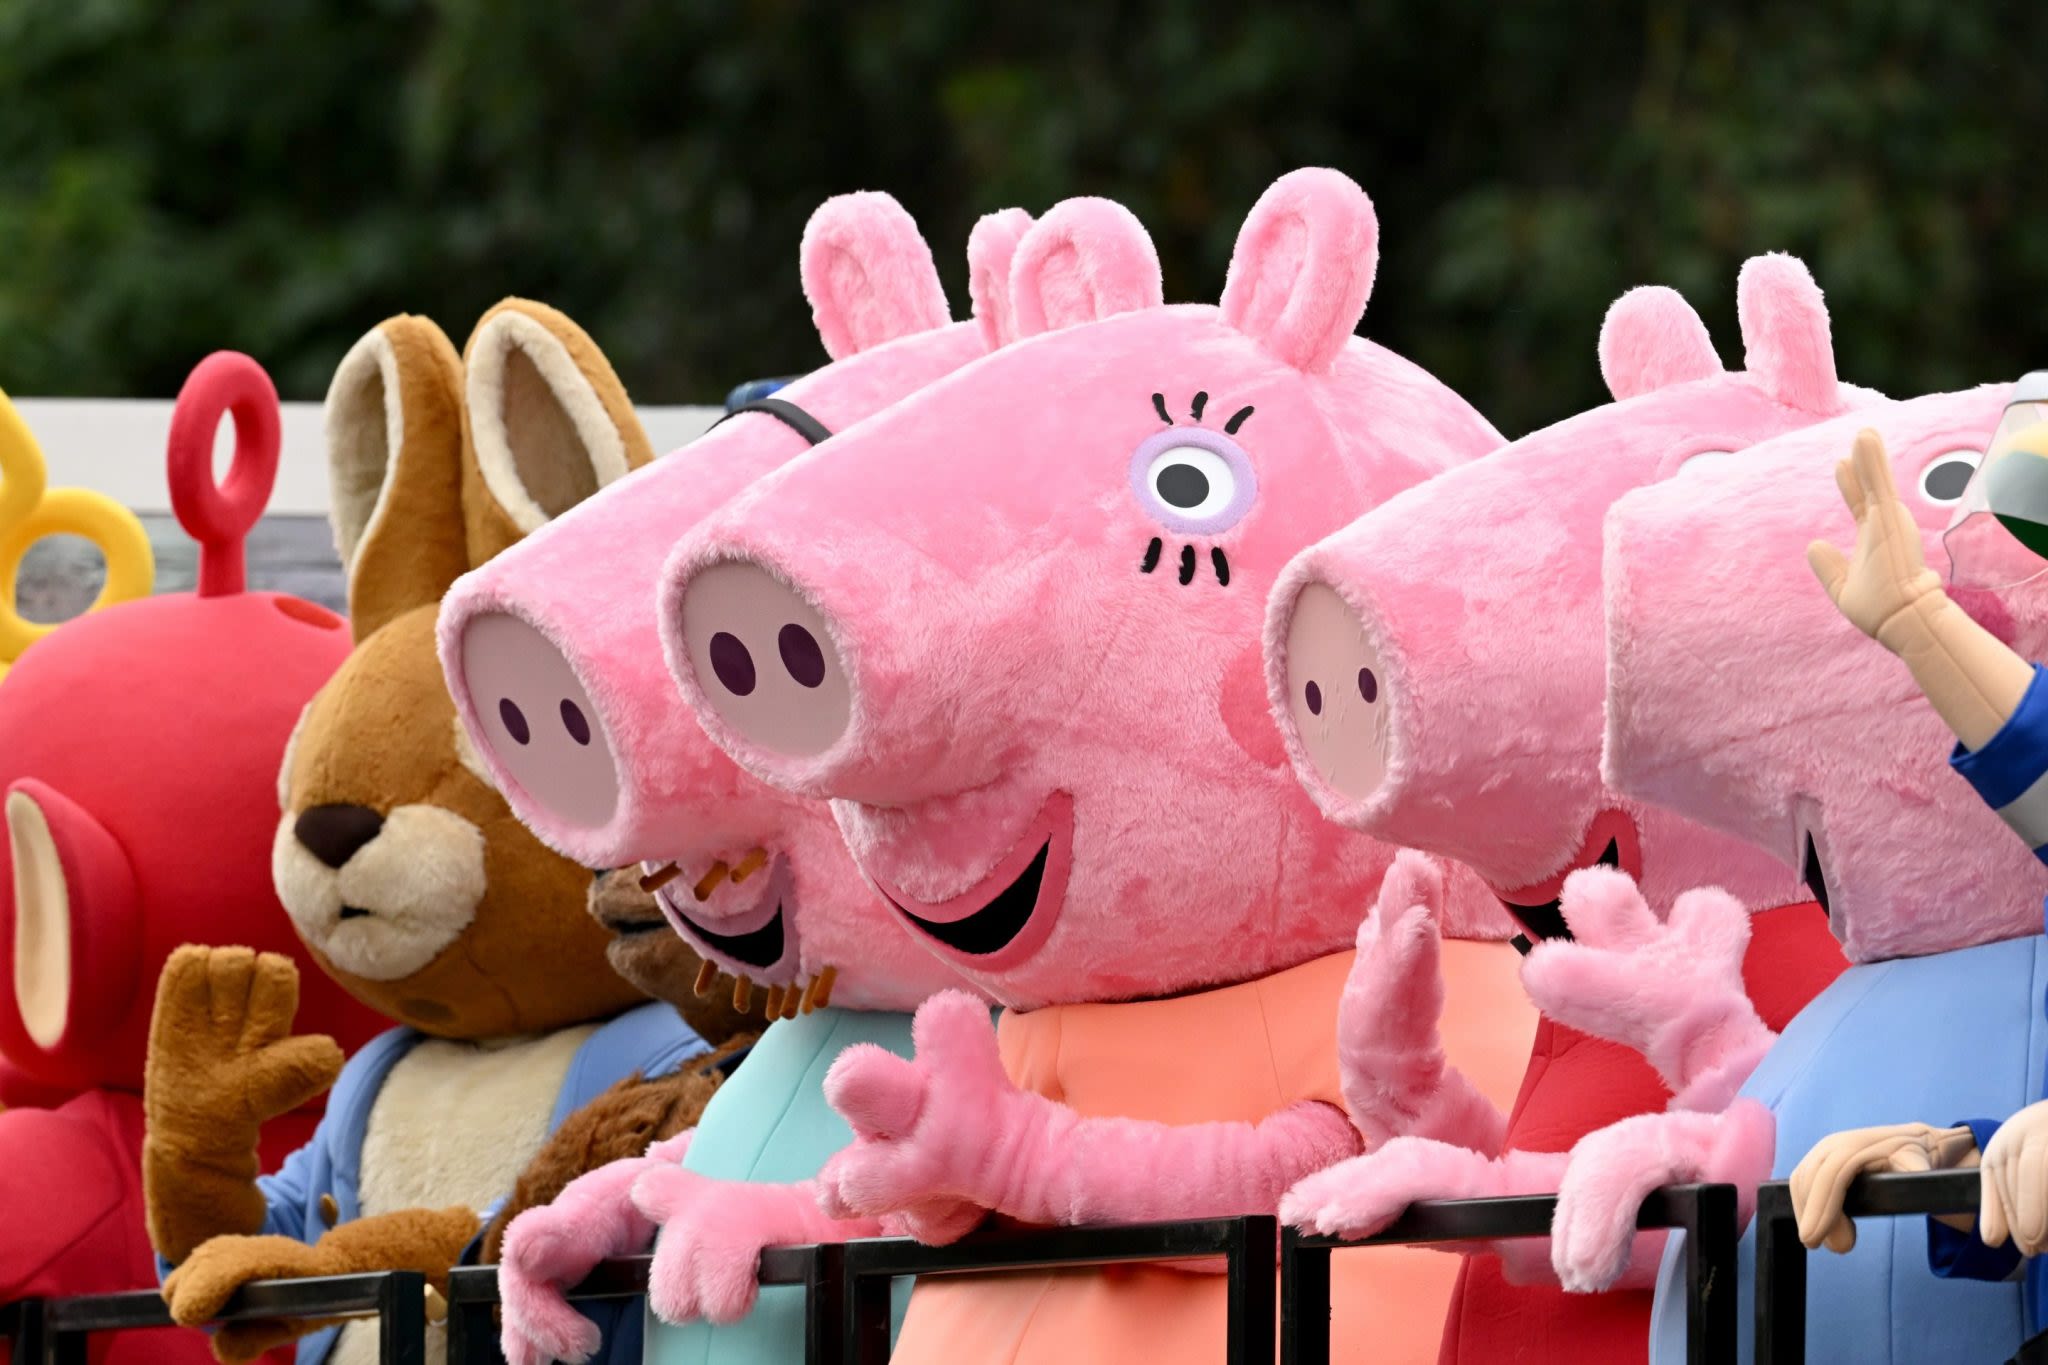 Snouts, muddy puddles and British accents: How Peppa Pig became a global cultural phenomenon—and a $1.7 billion franchise